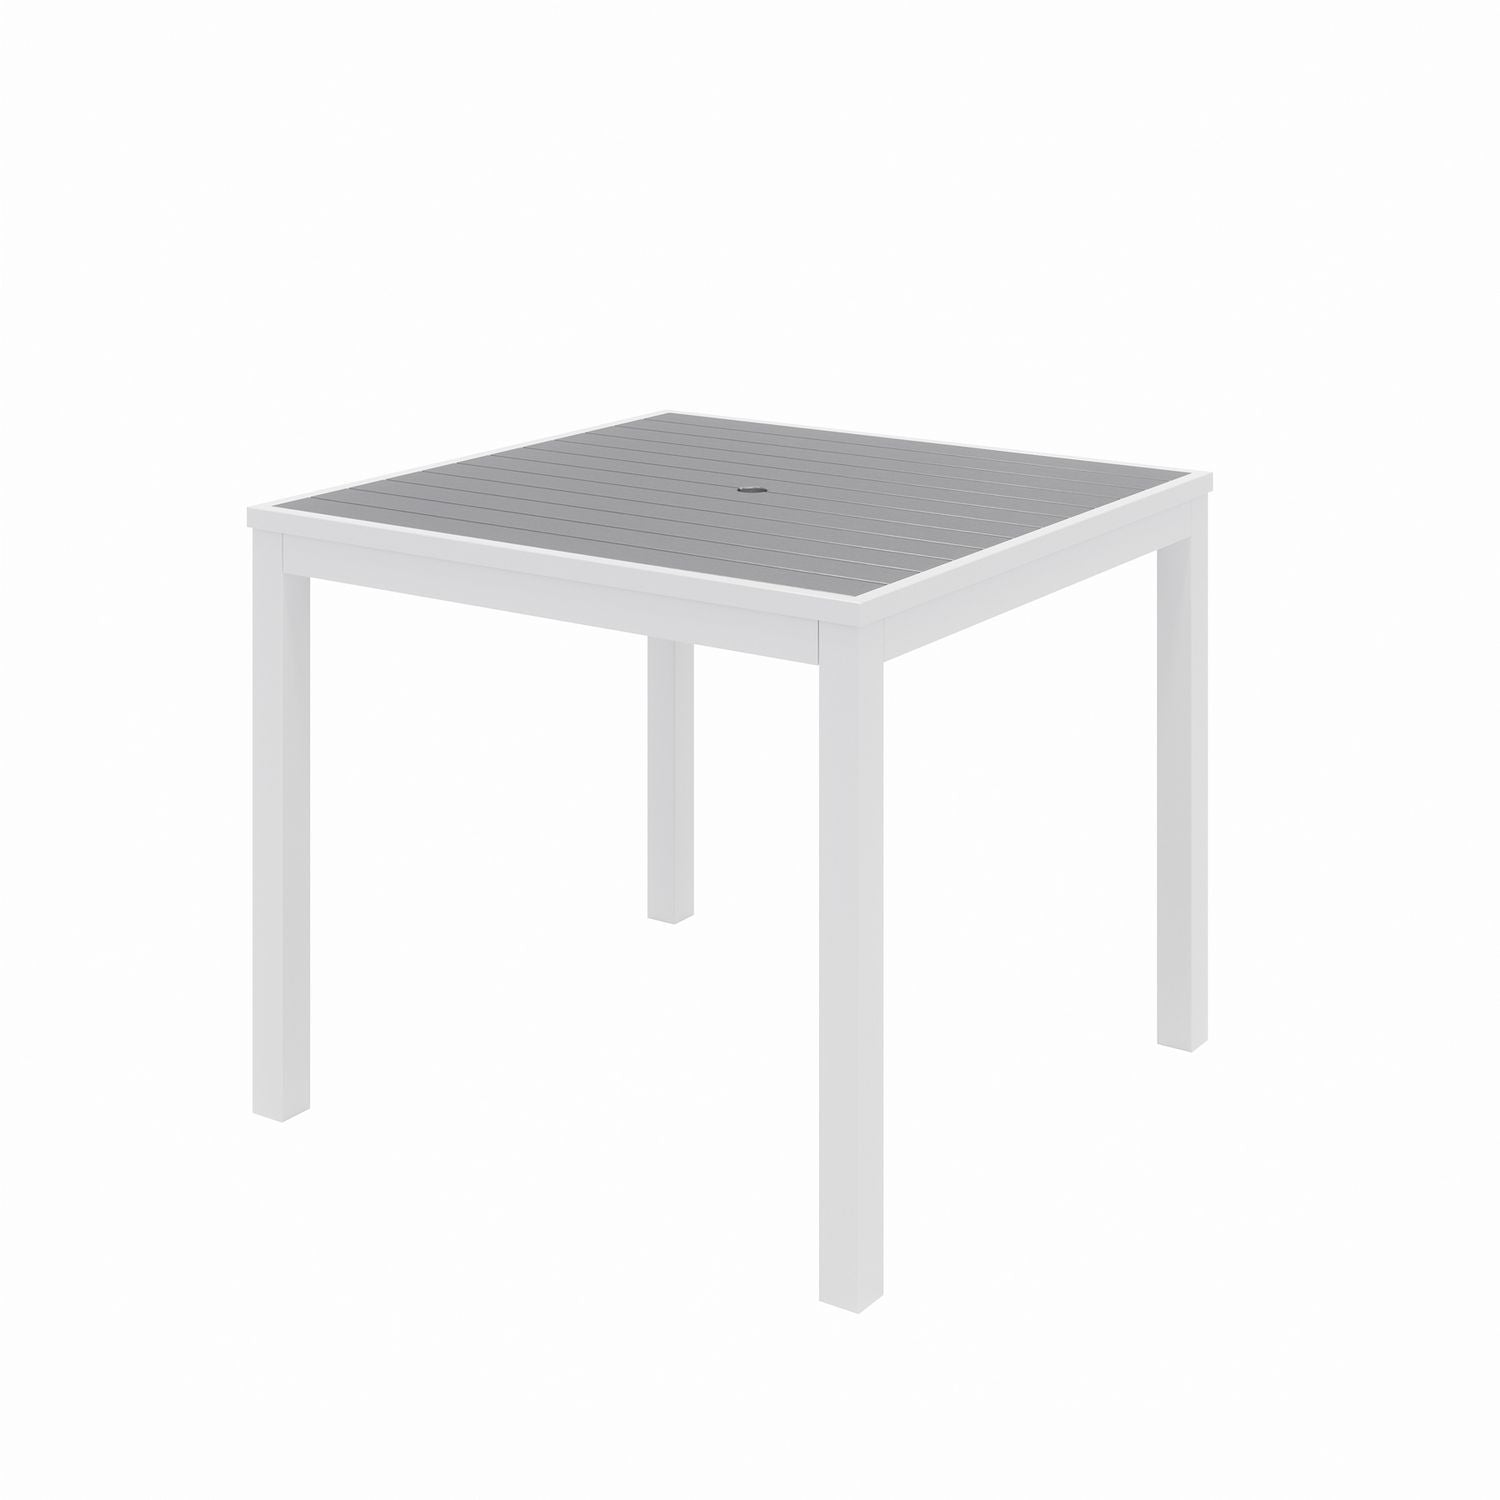 eveleen-outdoor-patio-table-with-four-gray-powder-coated-polymer-chairs-32-square-gray-ships-in-4-6-business-days_kfi840031918550 - 2